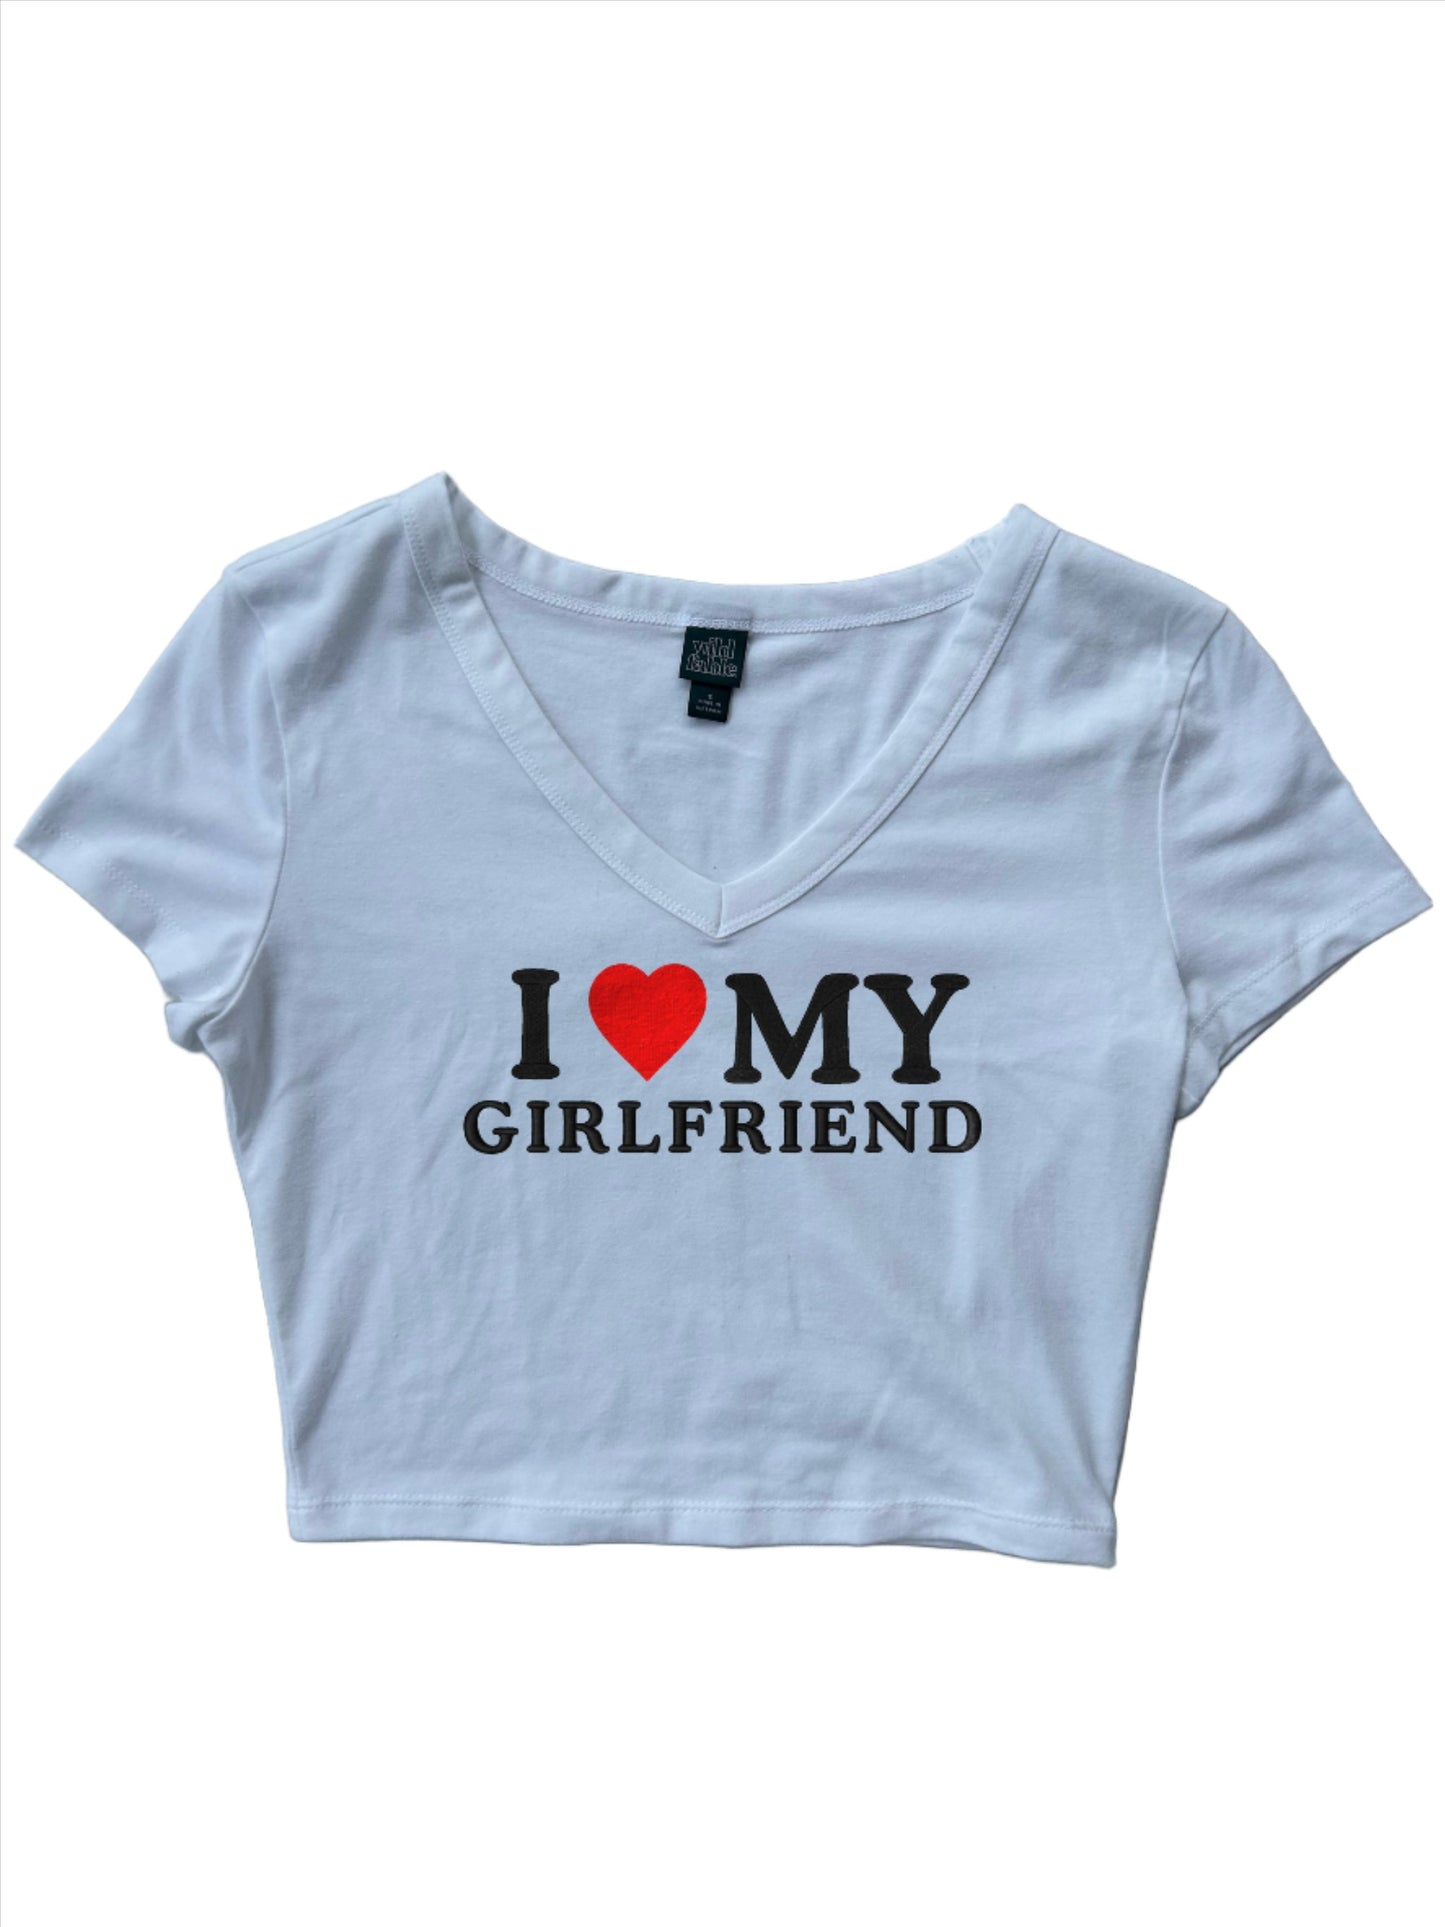 Embroidered ‘I Heart My Girlfriend’ Cropped Short Sleeve T-Shirt, Petite Fit, Adult Female by KDM Vintage